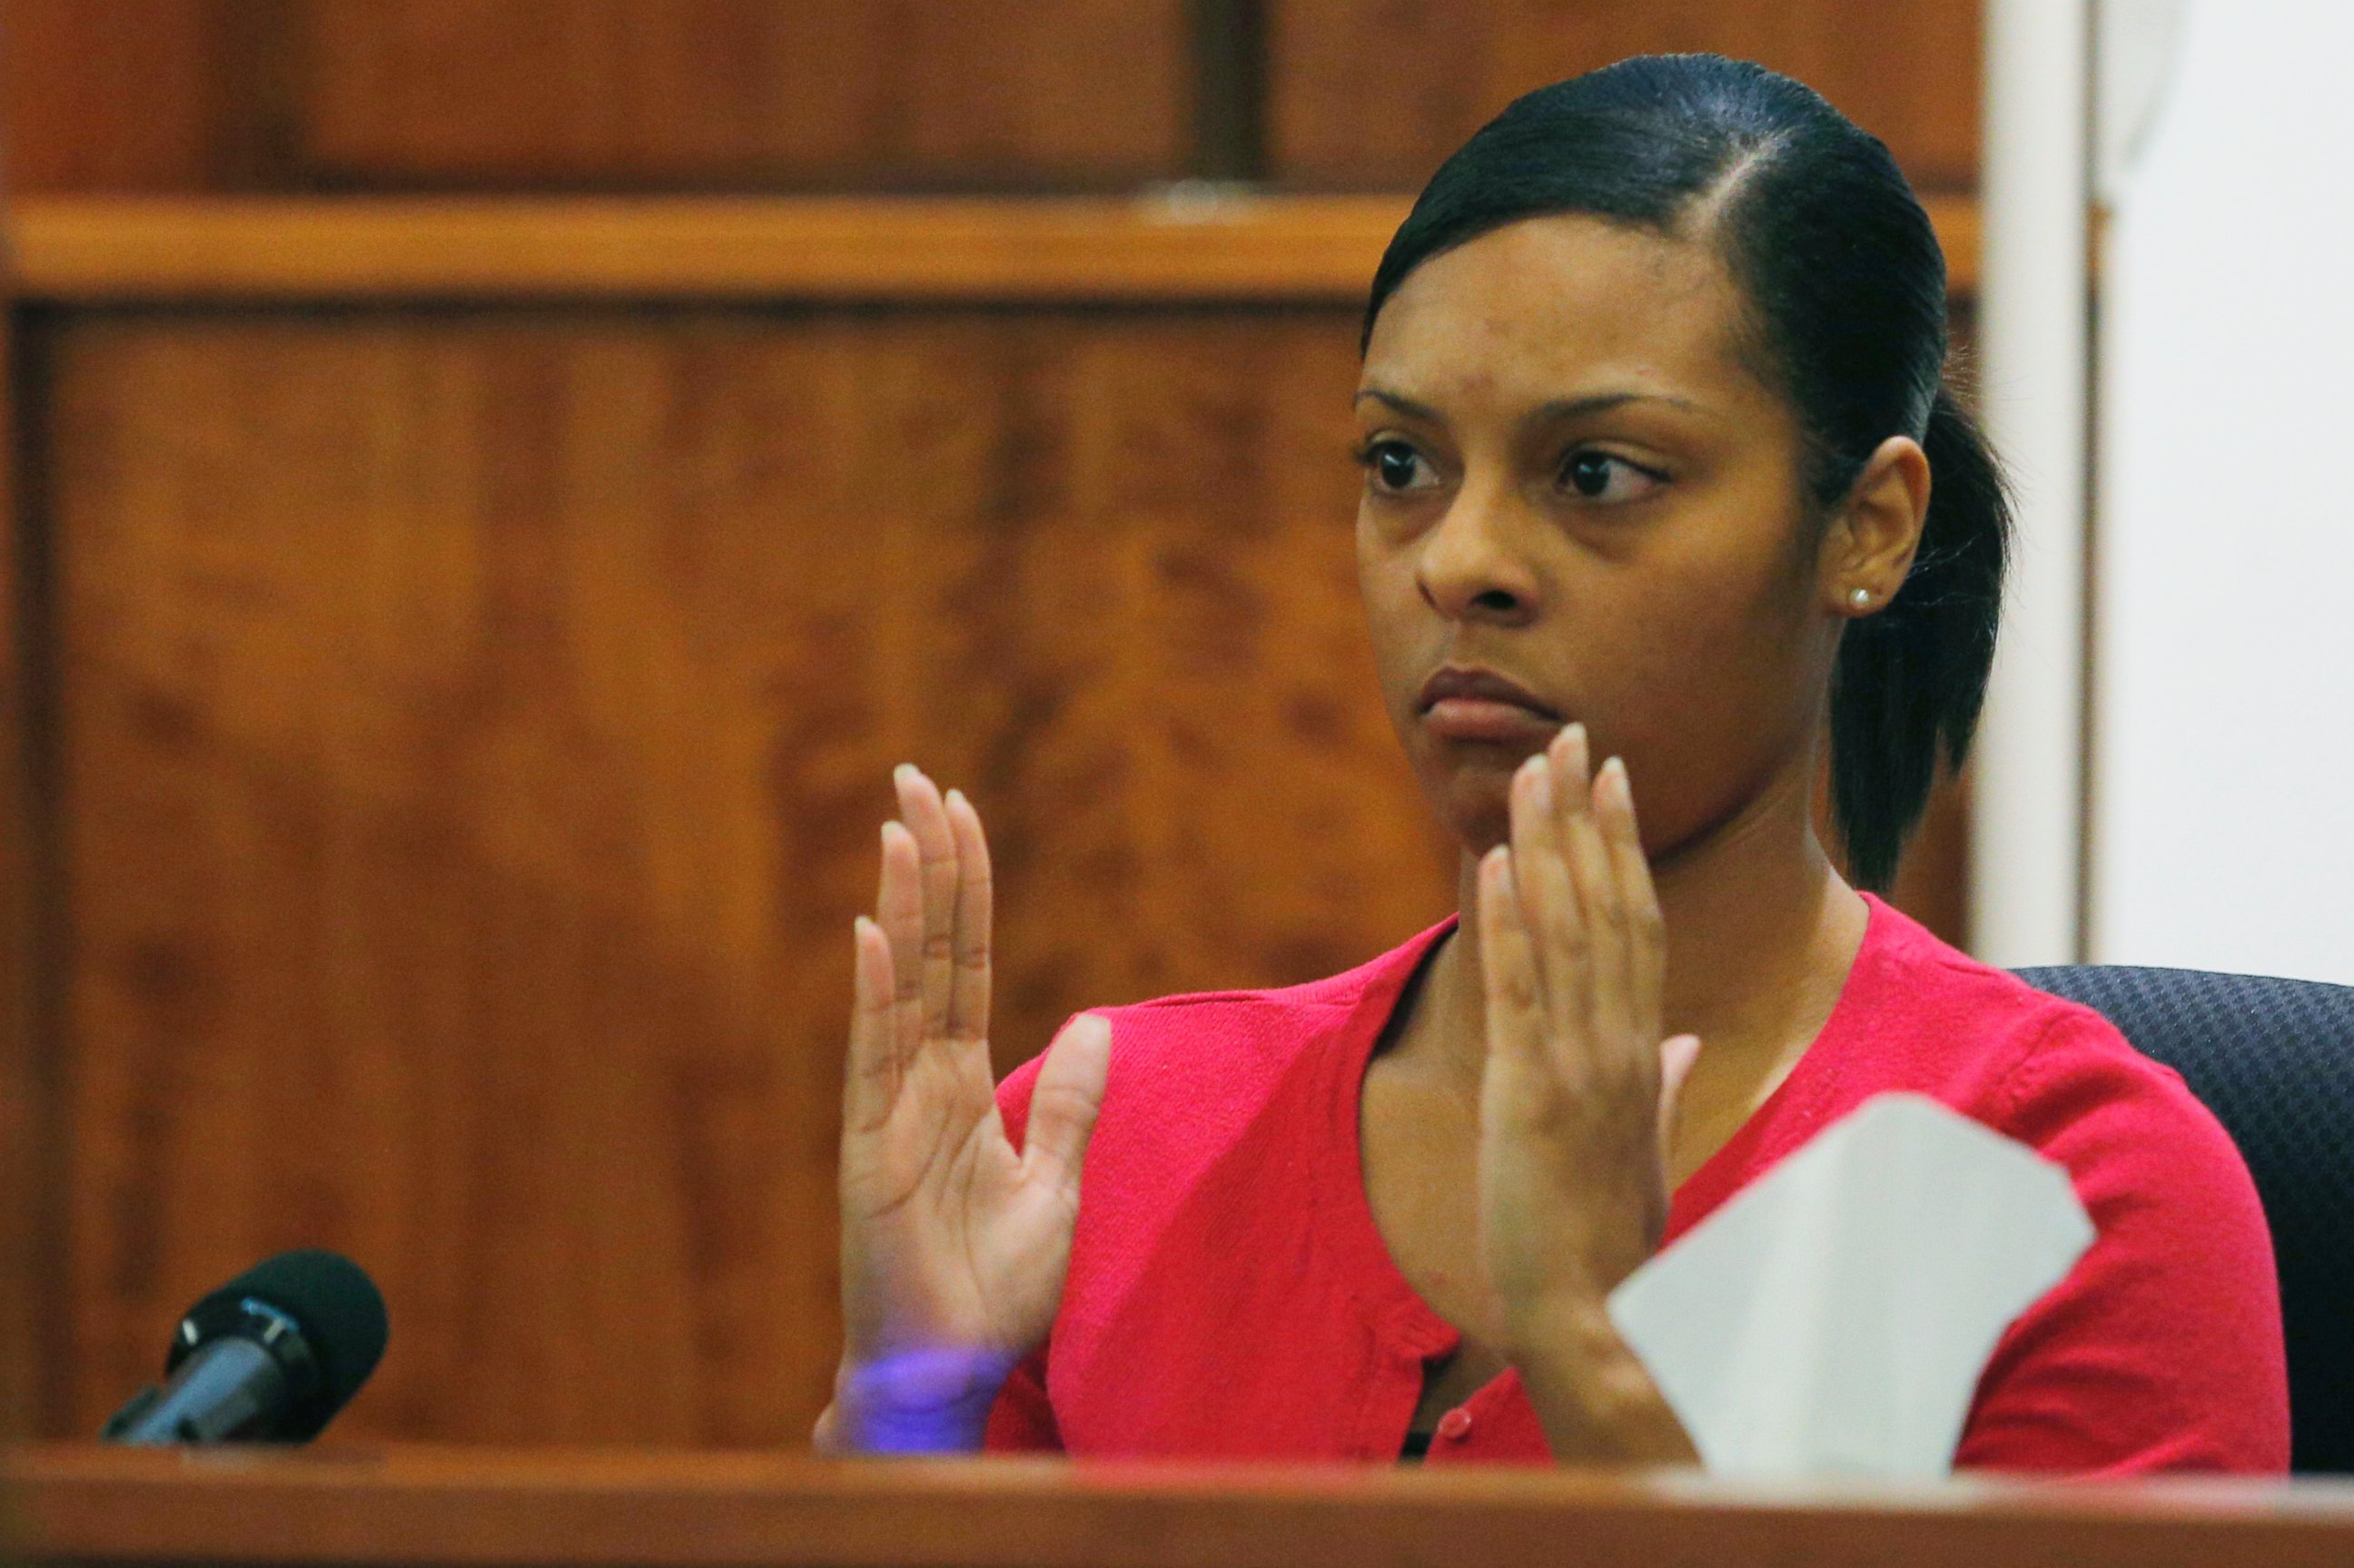 PHOTO: Shaneah Jenkins testifies during the murder trial of former NFL football player Aaron Hernandez at Bristol County Superior Court in Fall River, Mass. on Feb. 4, 2015.